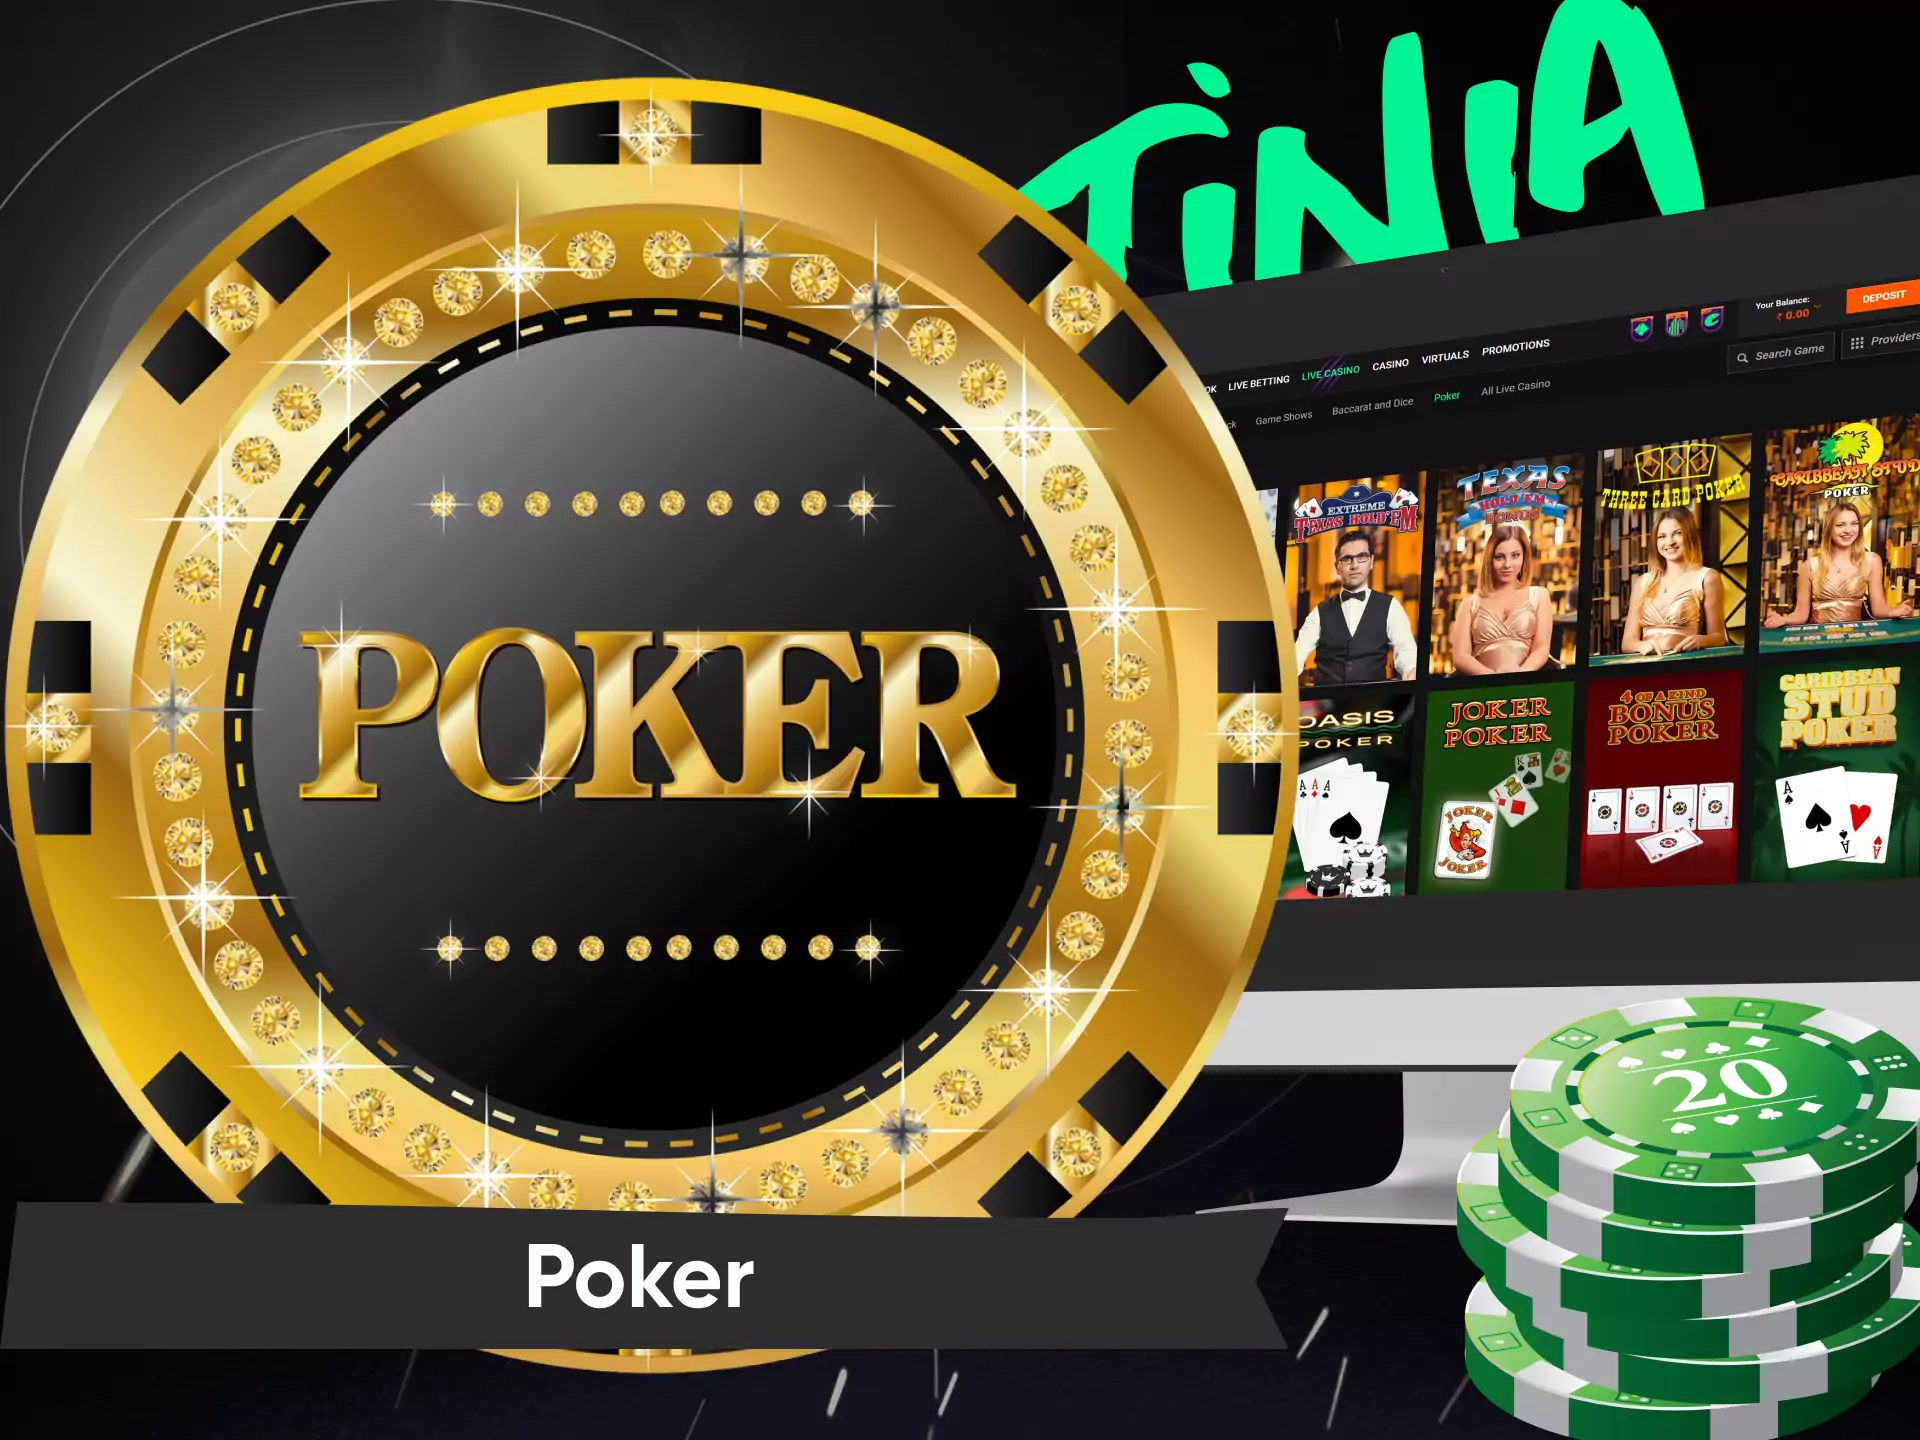 Poker is a popular table game that you can play in the Betinia Casino.